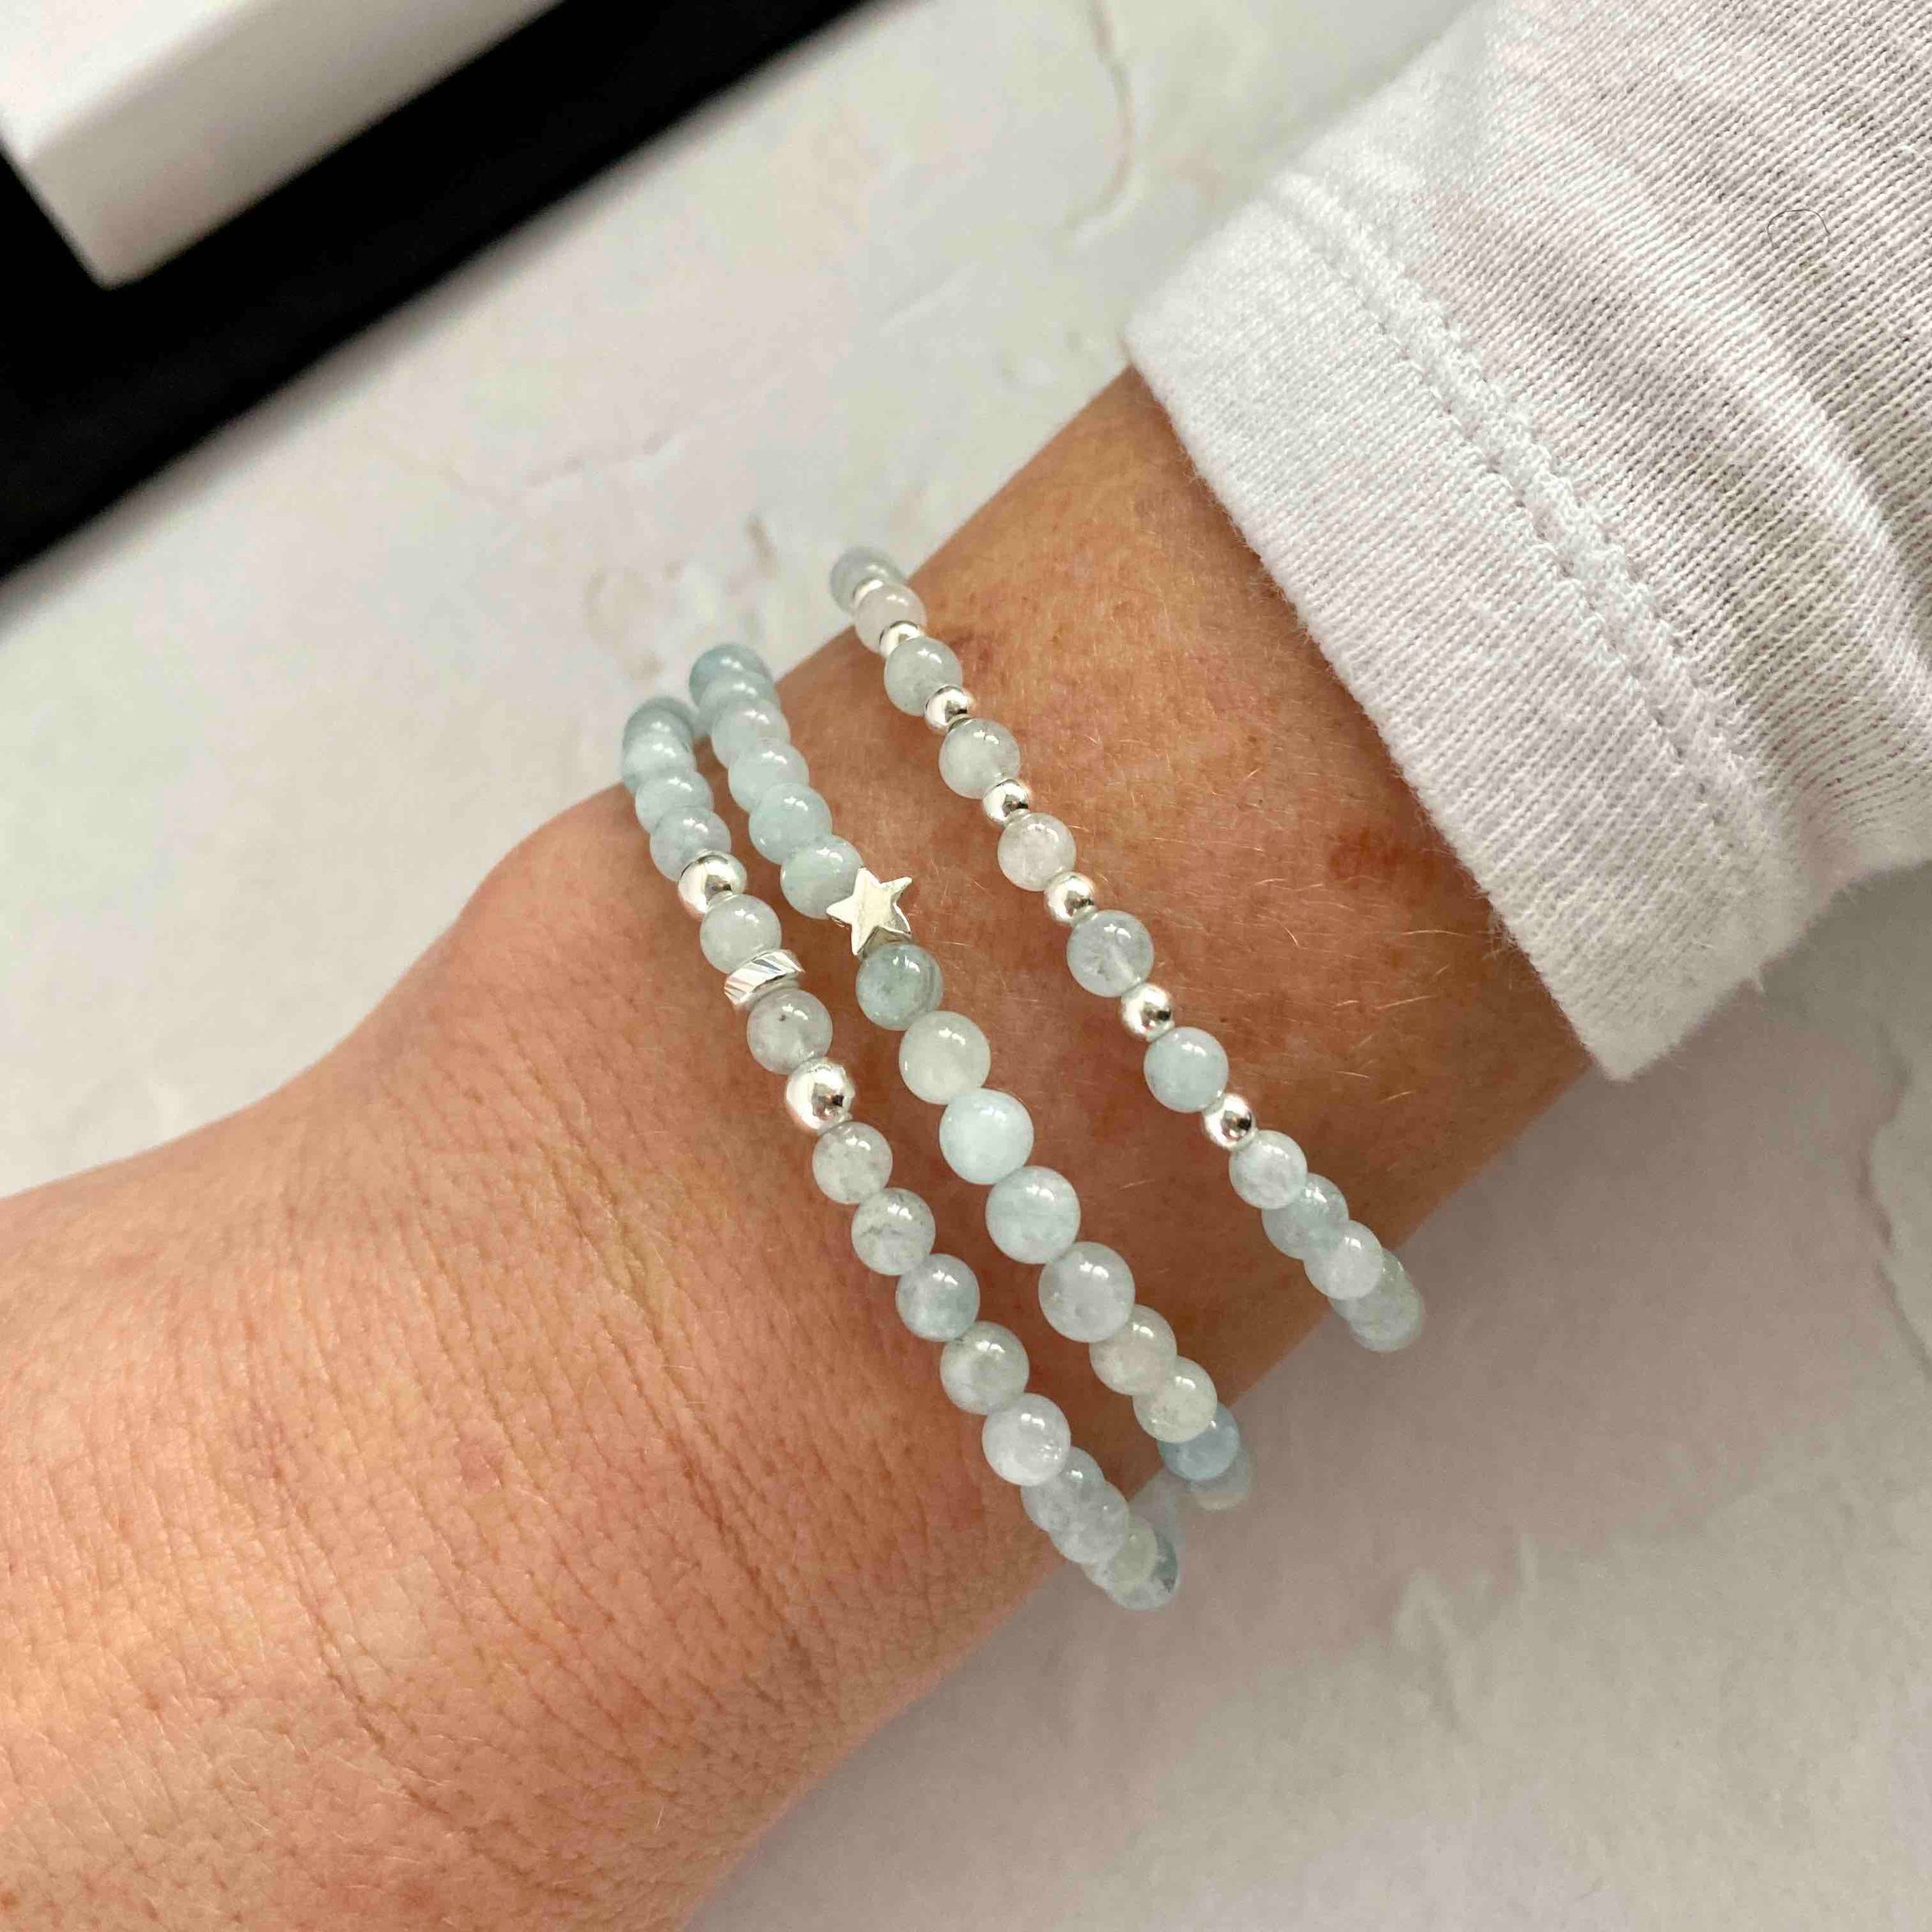 Natural Ice Aquamarine Crystal Bracelet Collectable with Agate Bead  Gemstone Healing Crystal Bracelet Lucky Charms Attract Good Luck Wealth  Gift for Women/Men : Amazon.co.uk: Fashion